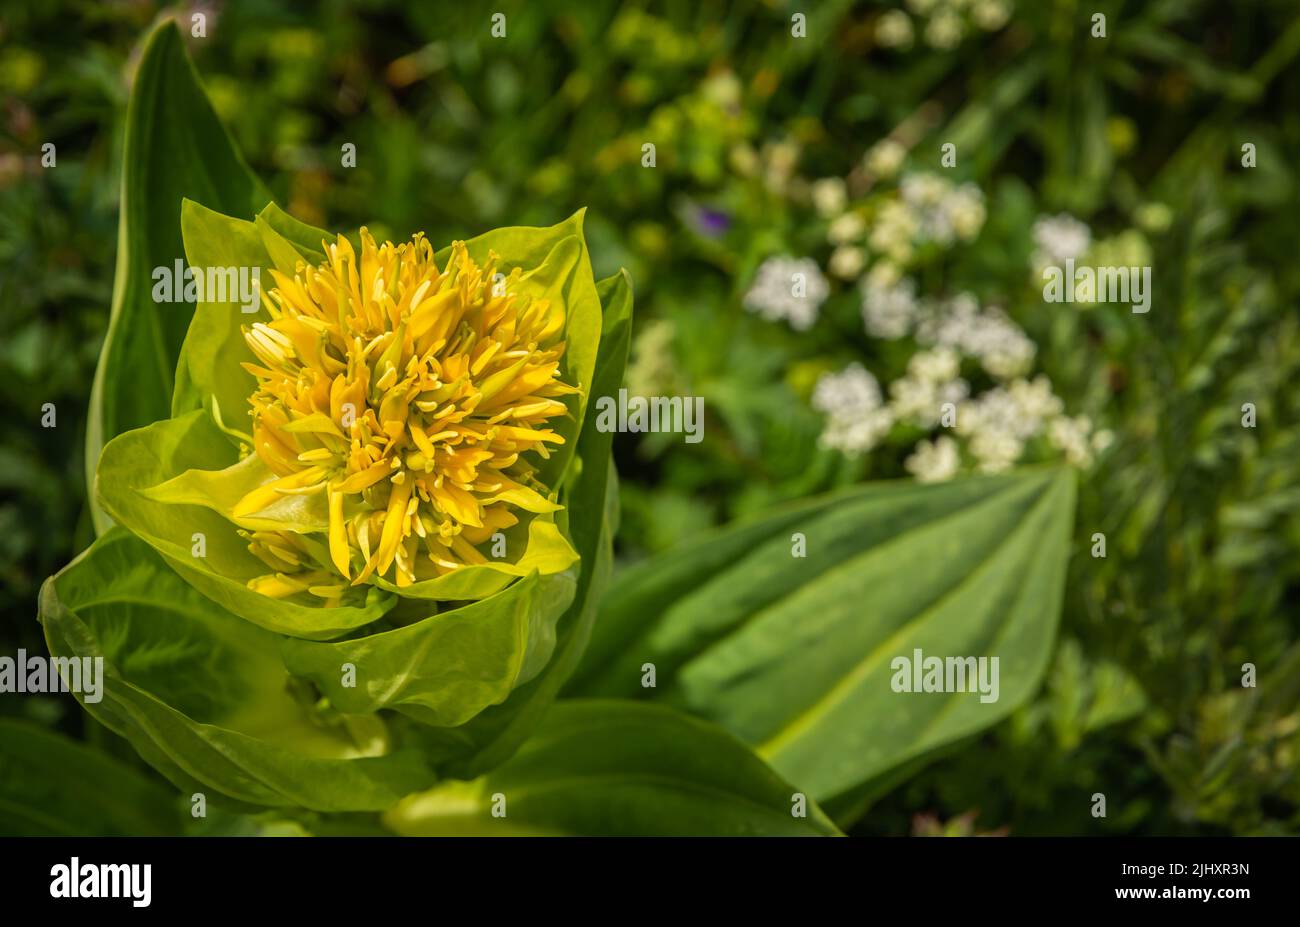 Gentiana lutea.( Mountain flower. The Dolomites. Italian Alps. Europe. It grows in grassy alpine and sub-alpine pastures, usually on calcareous soils. Stock Photo